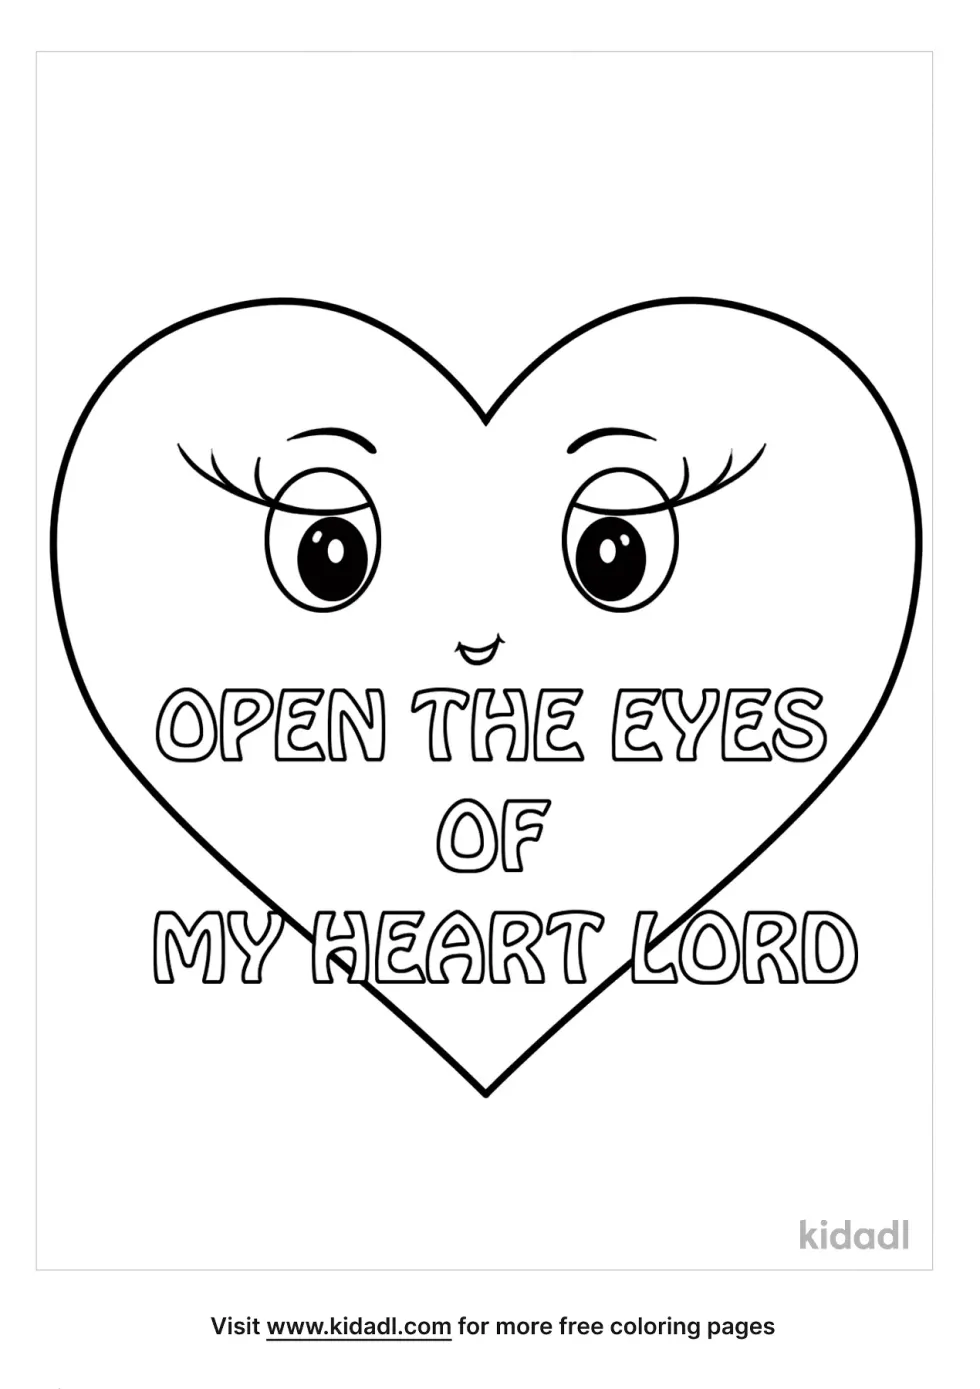 Open The Eyes Of My Heart Lord Coloring Page